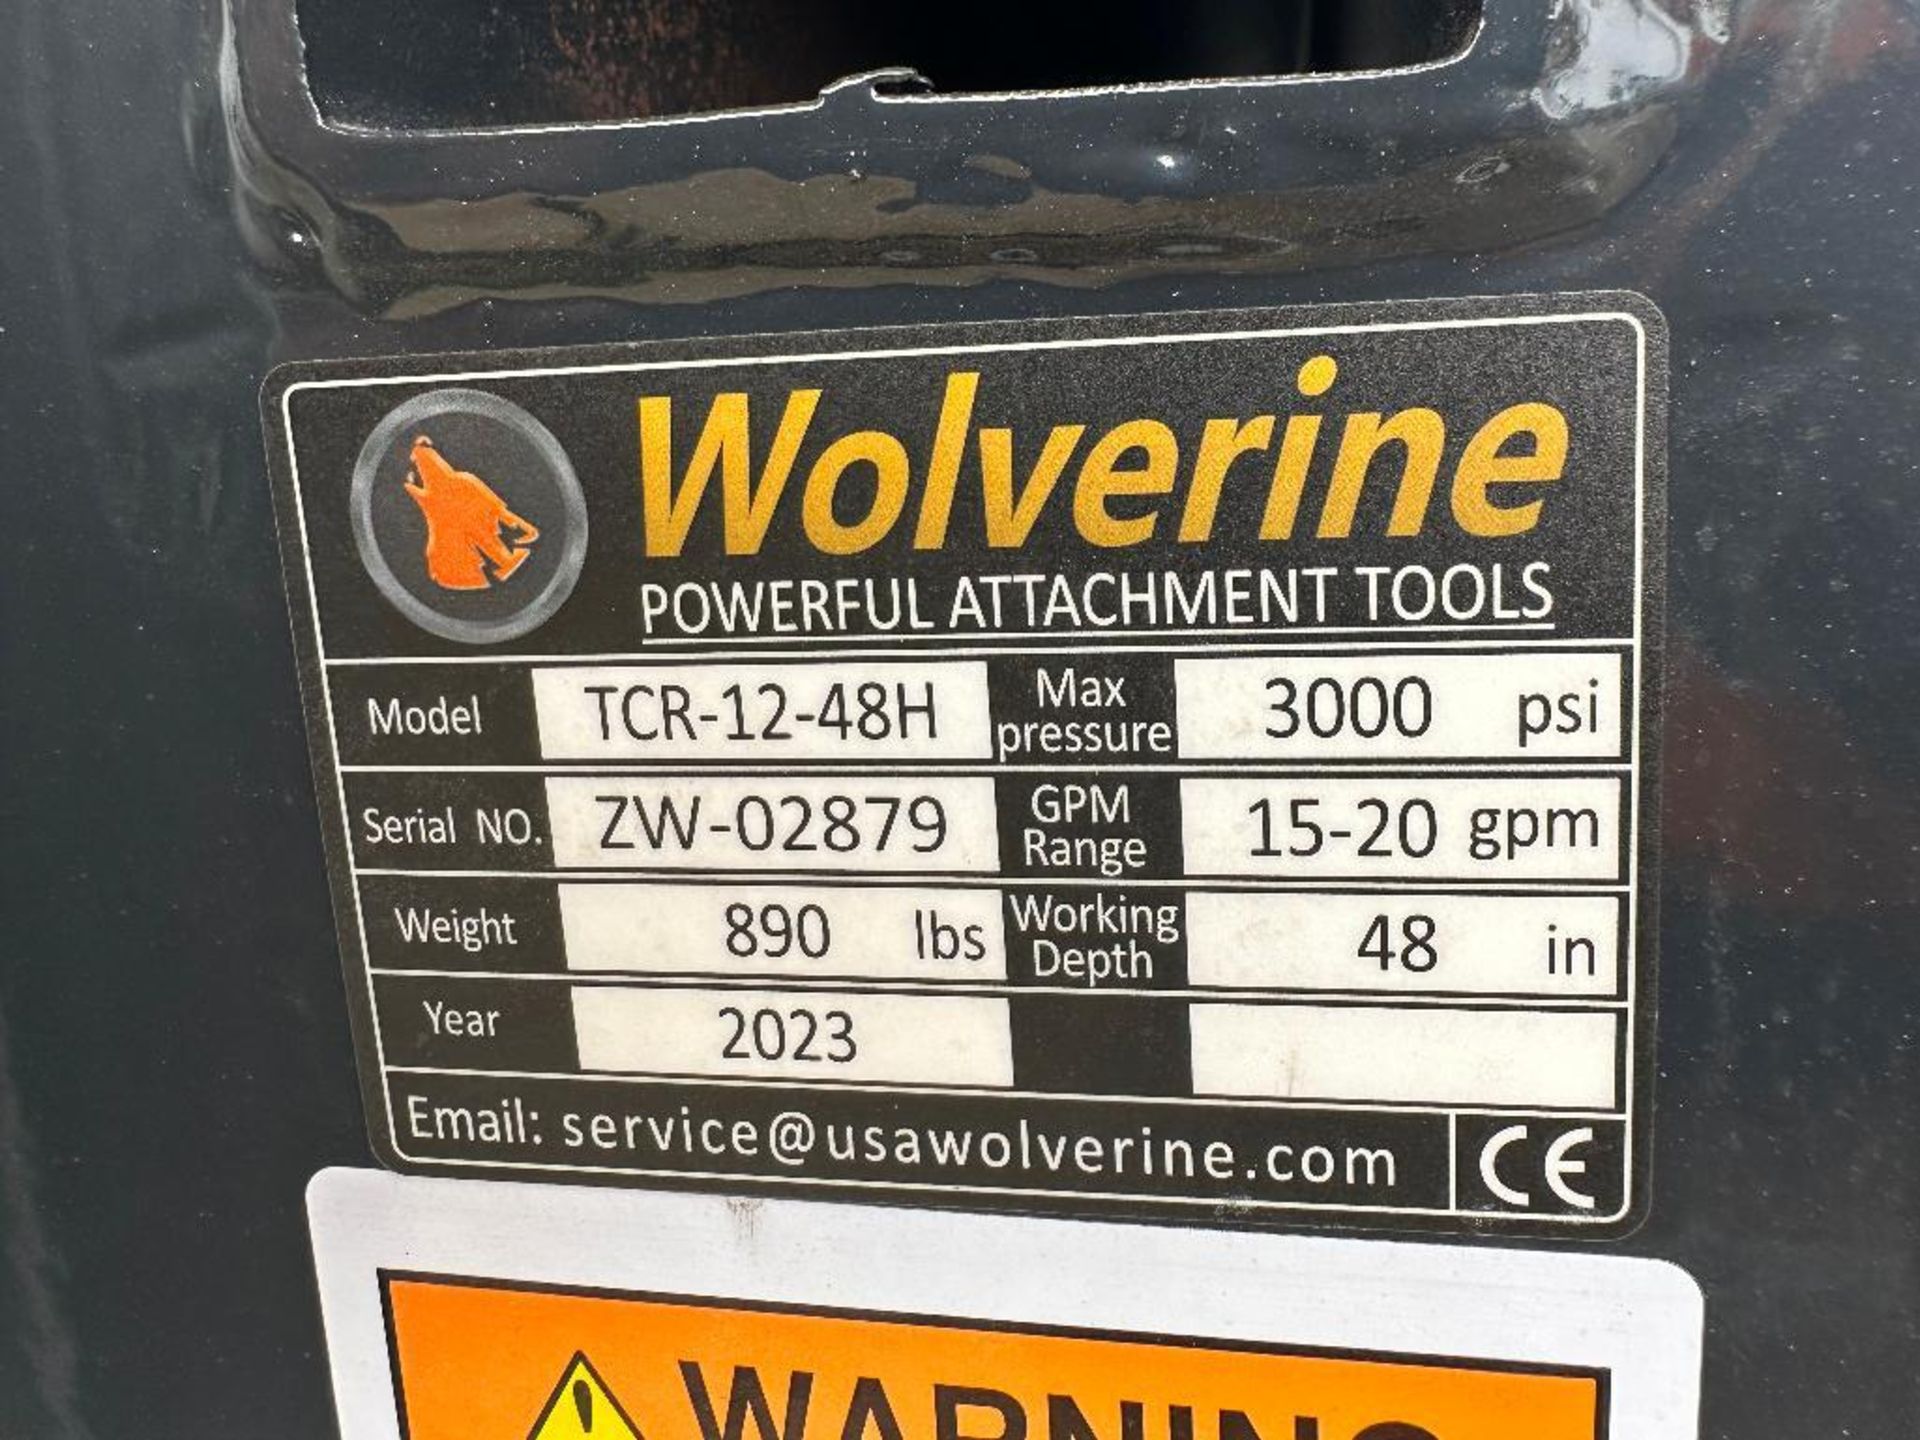 New 2023 Wolverine TCR-12-48H 48" Skid Steer Trencher Attachment - Image 5 of 5